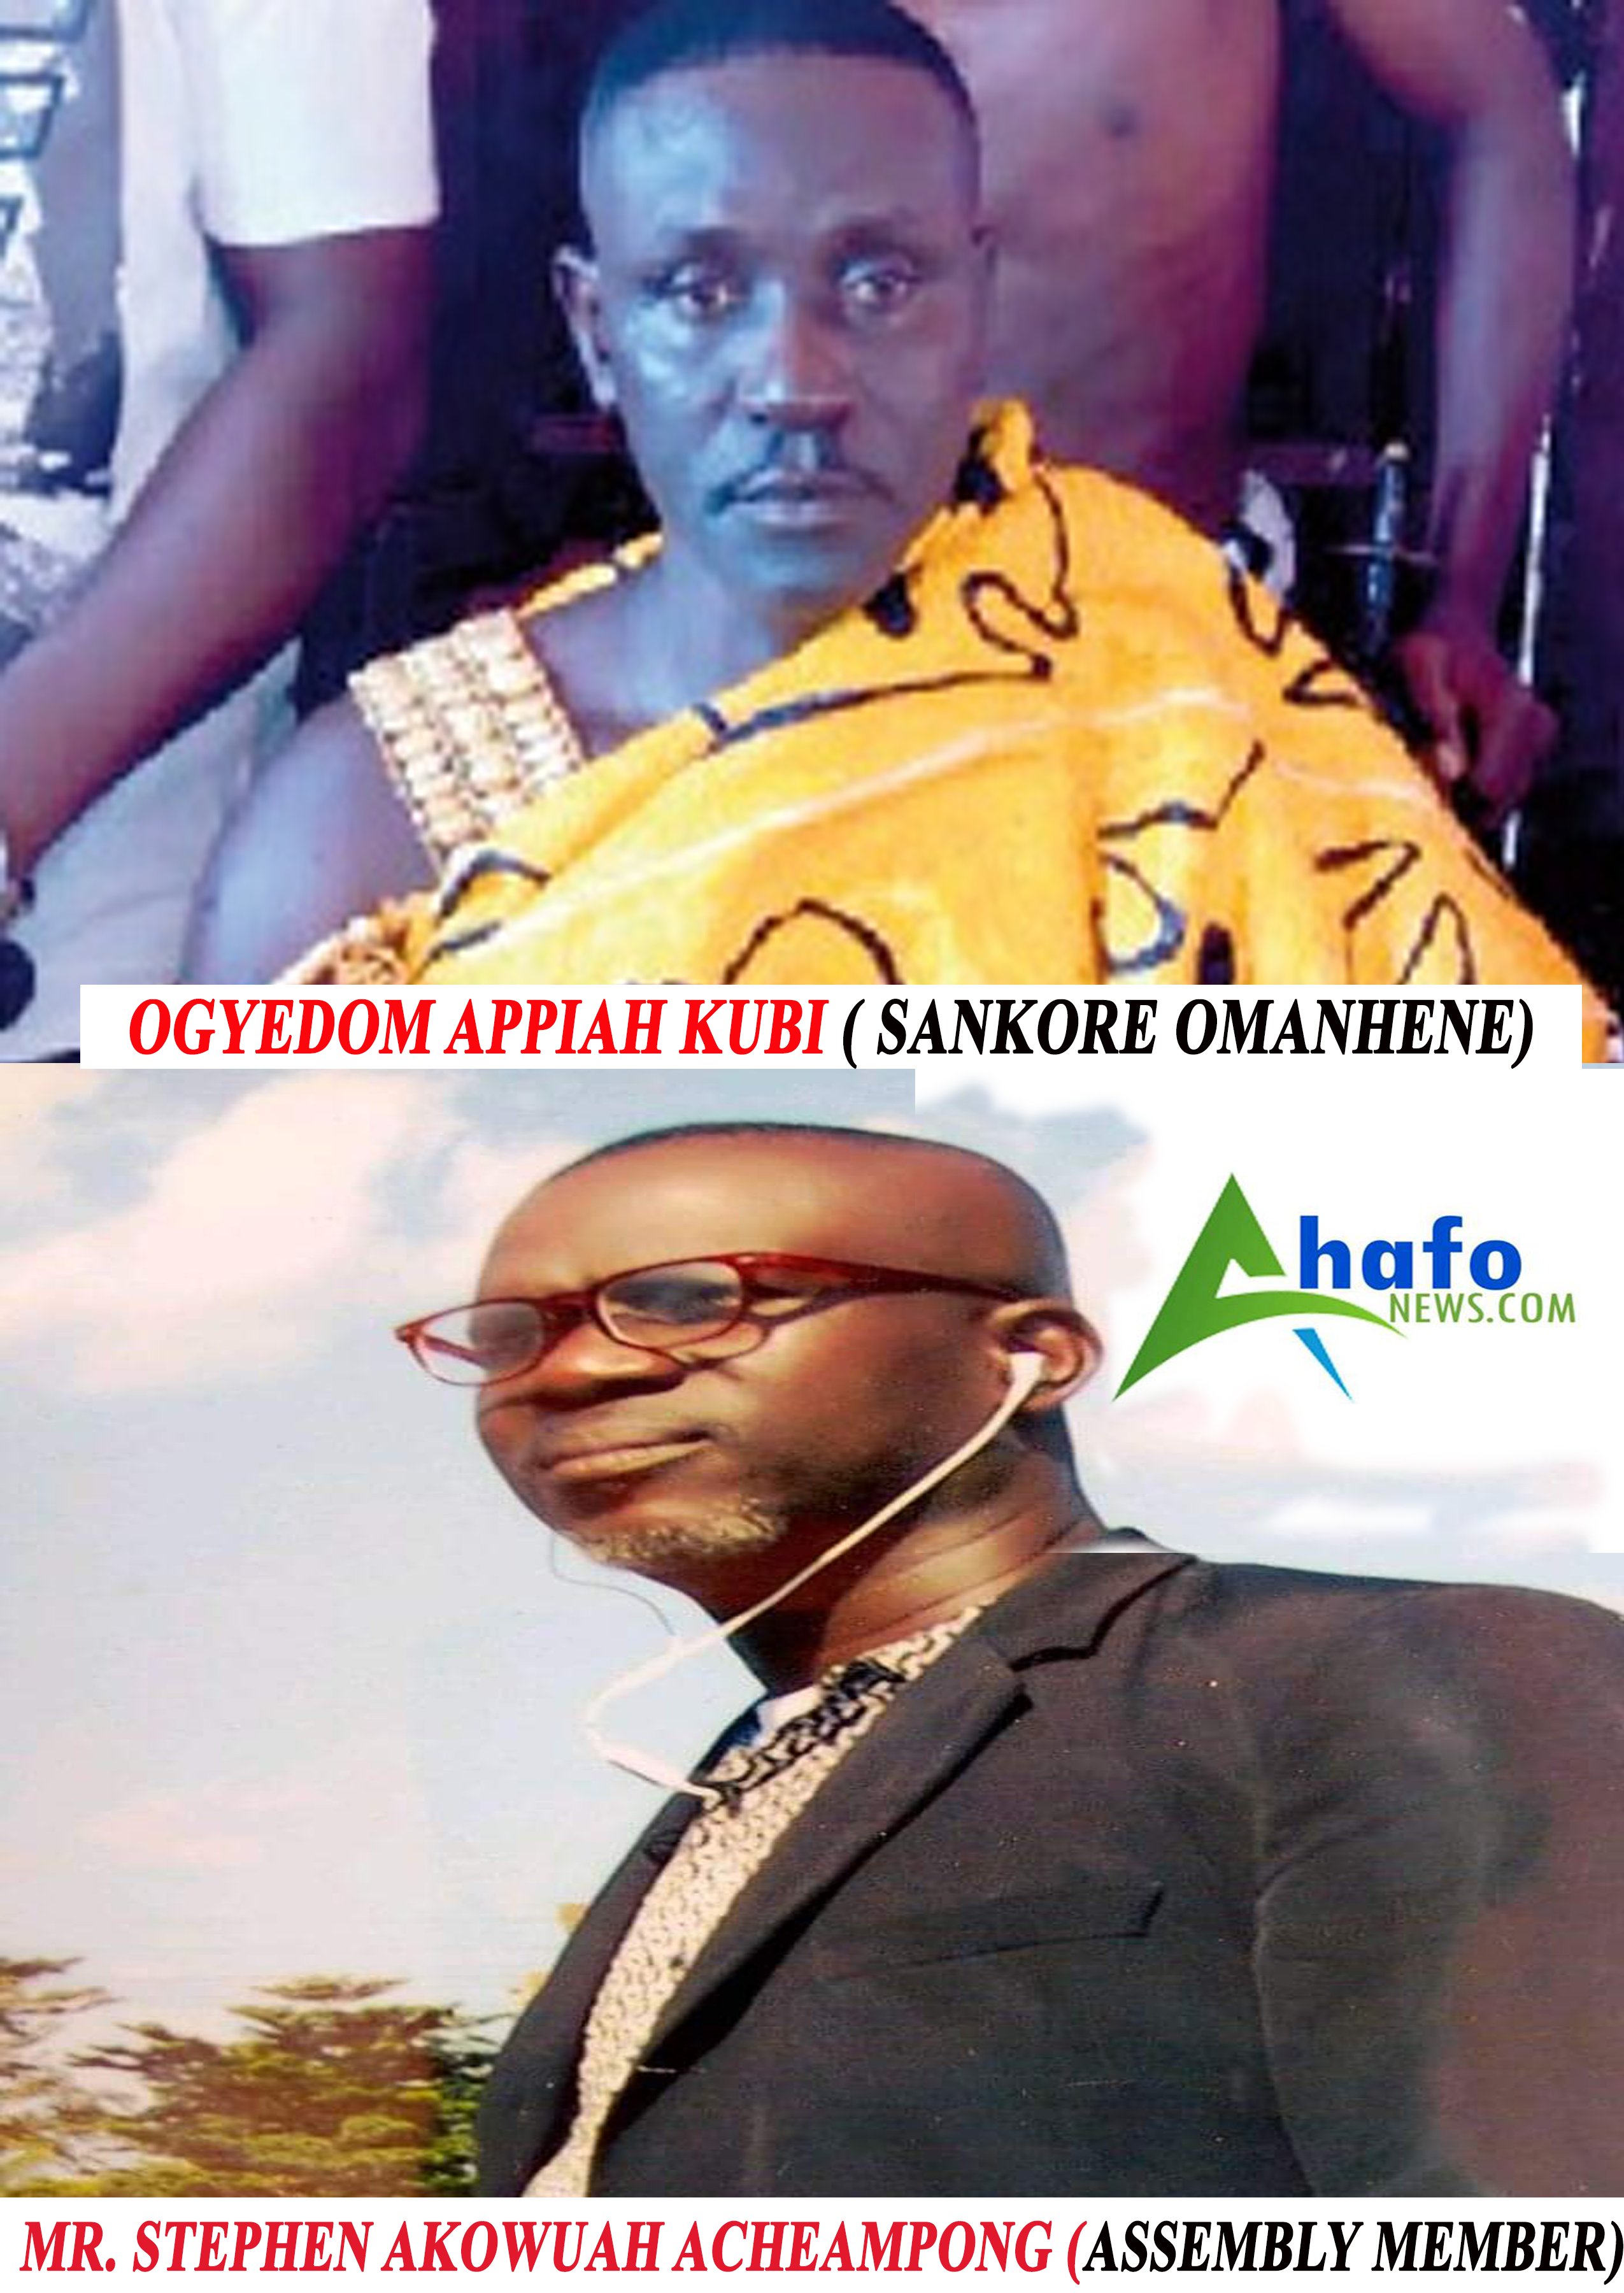 The Fact of the Case between The Omanhene of Sankore and Mr. Stephen Akowuah’s Grudge